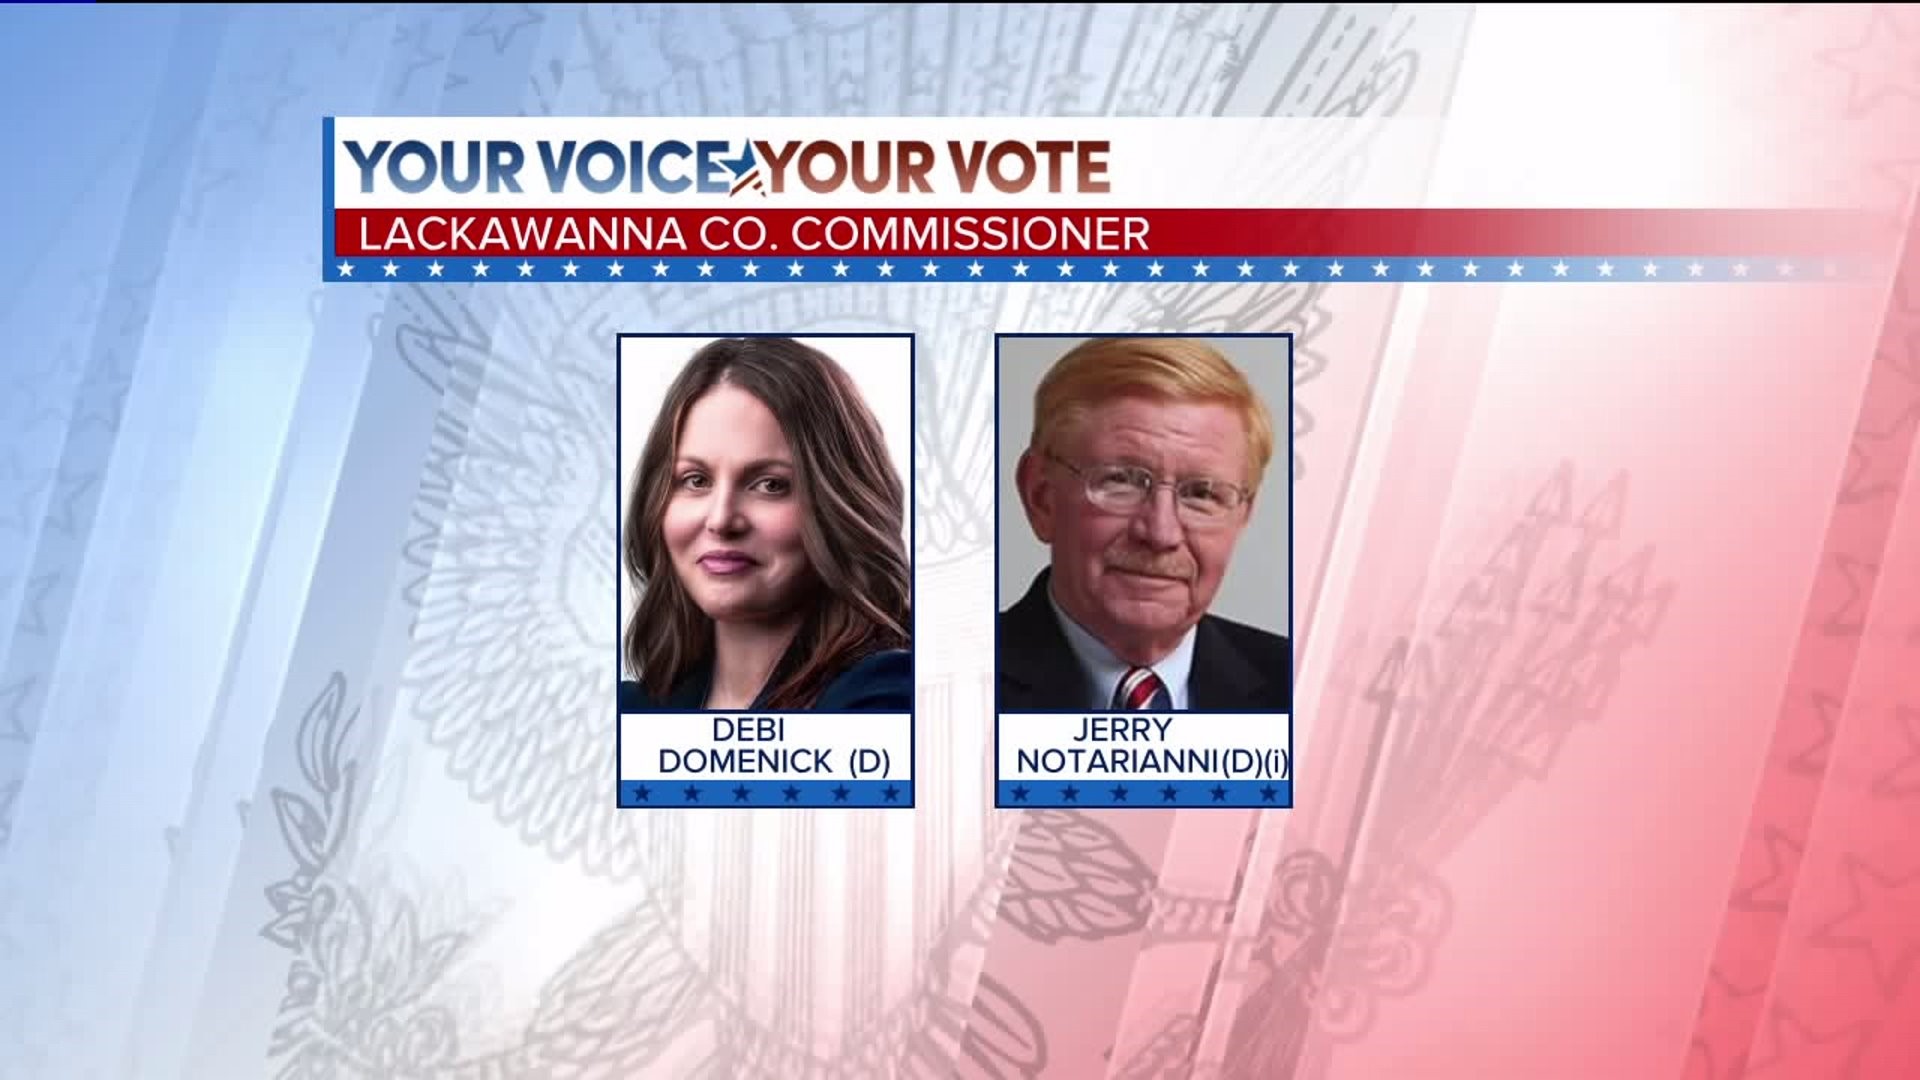 Democrats Domenick and Notarianni Claim Lackawanna County Commissioners Spots